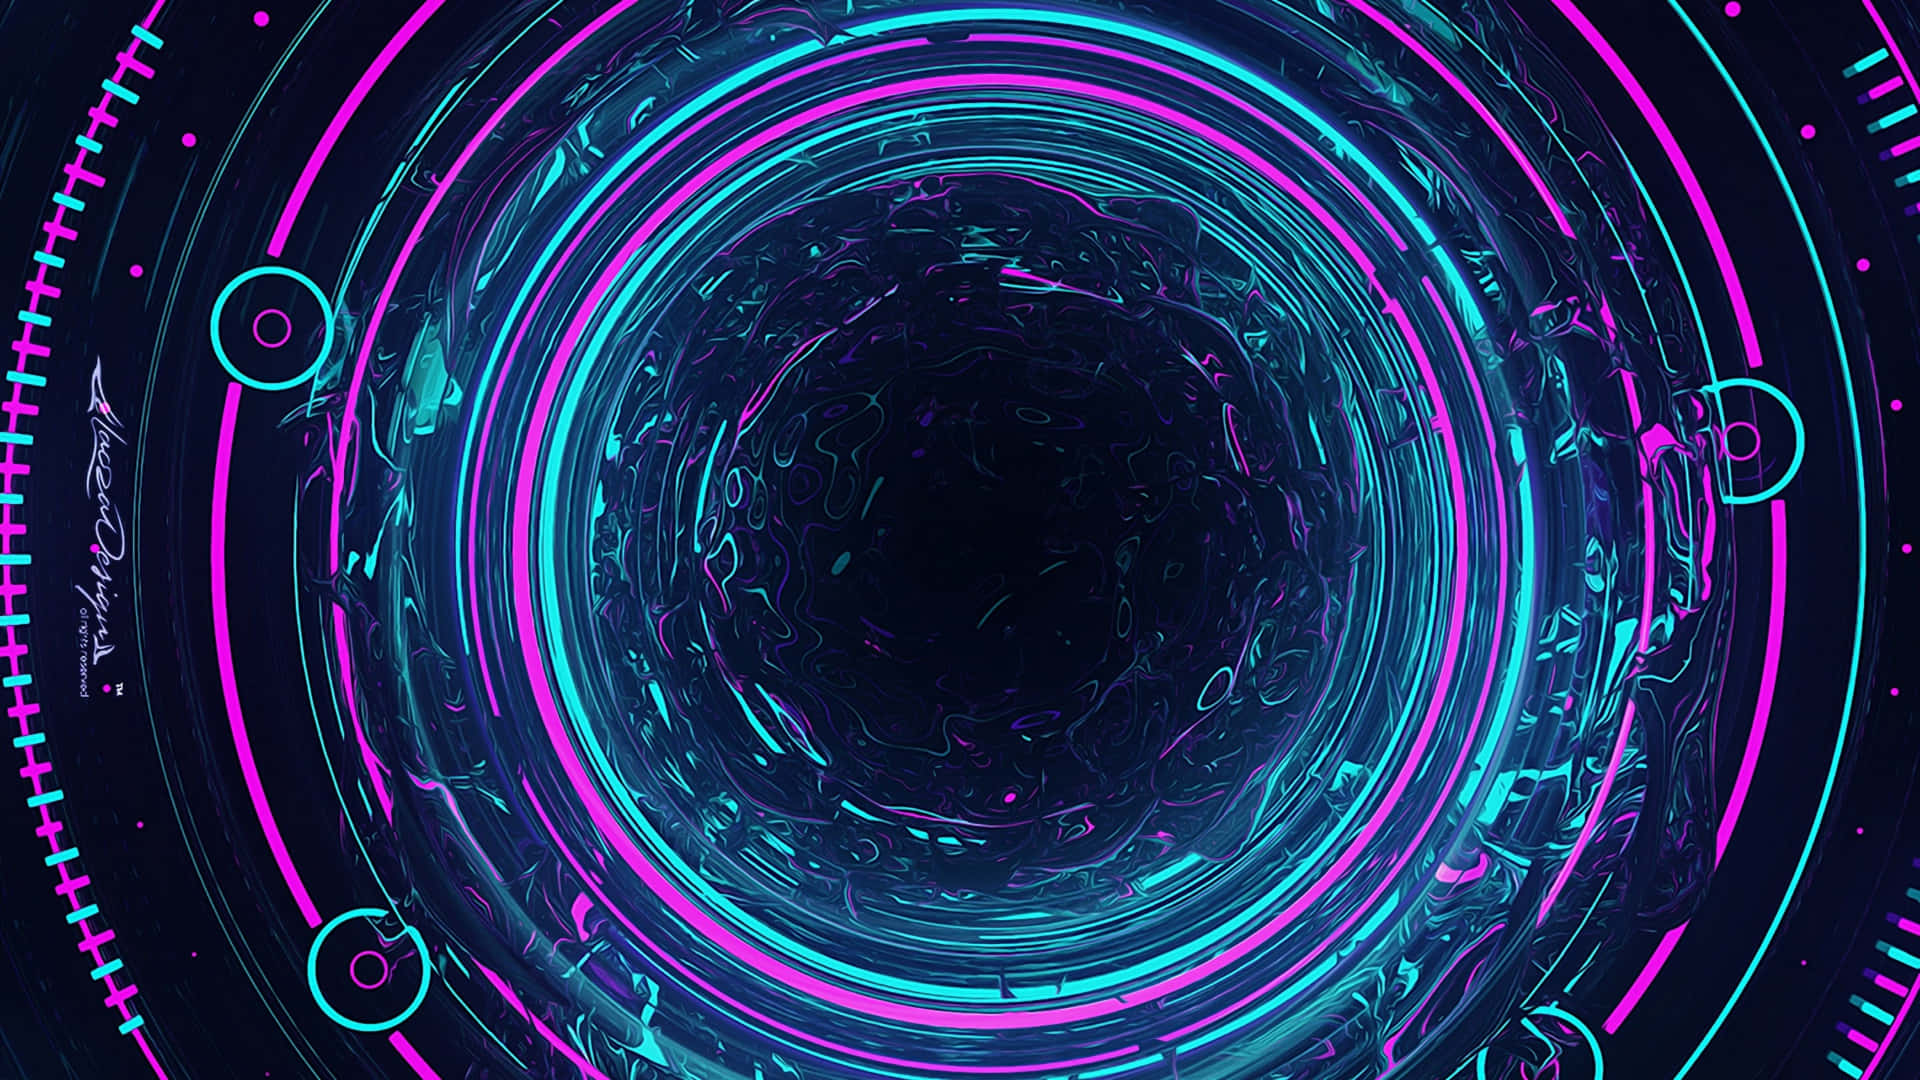 A Circular Neon Light Tunnel With Blue And Purple Lights Wallpaper